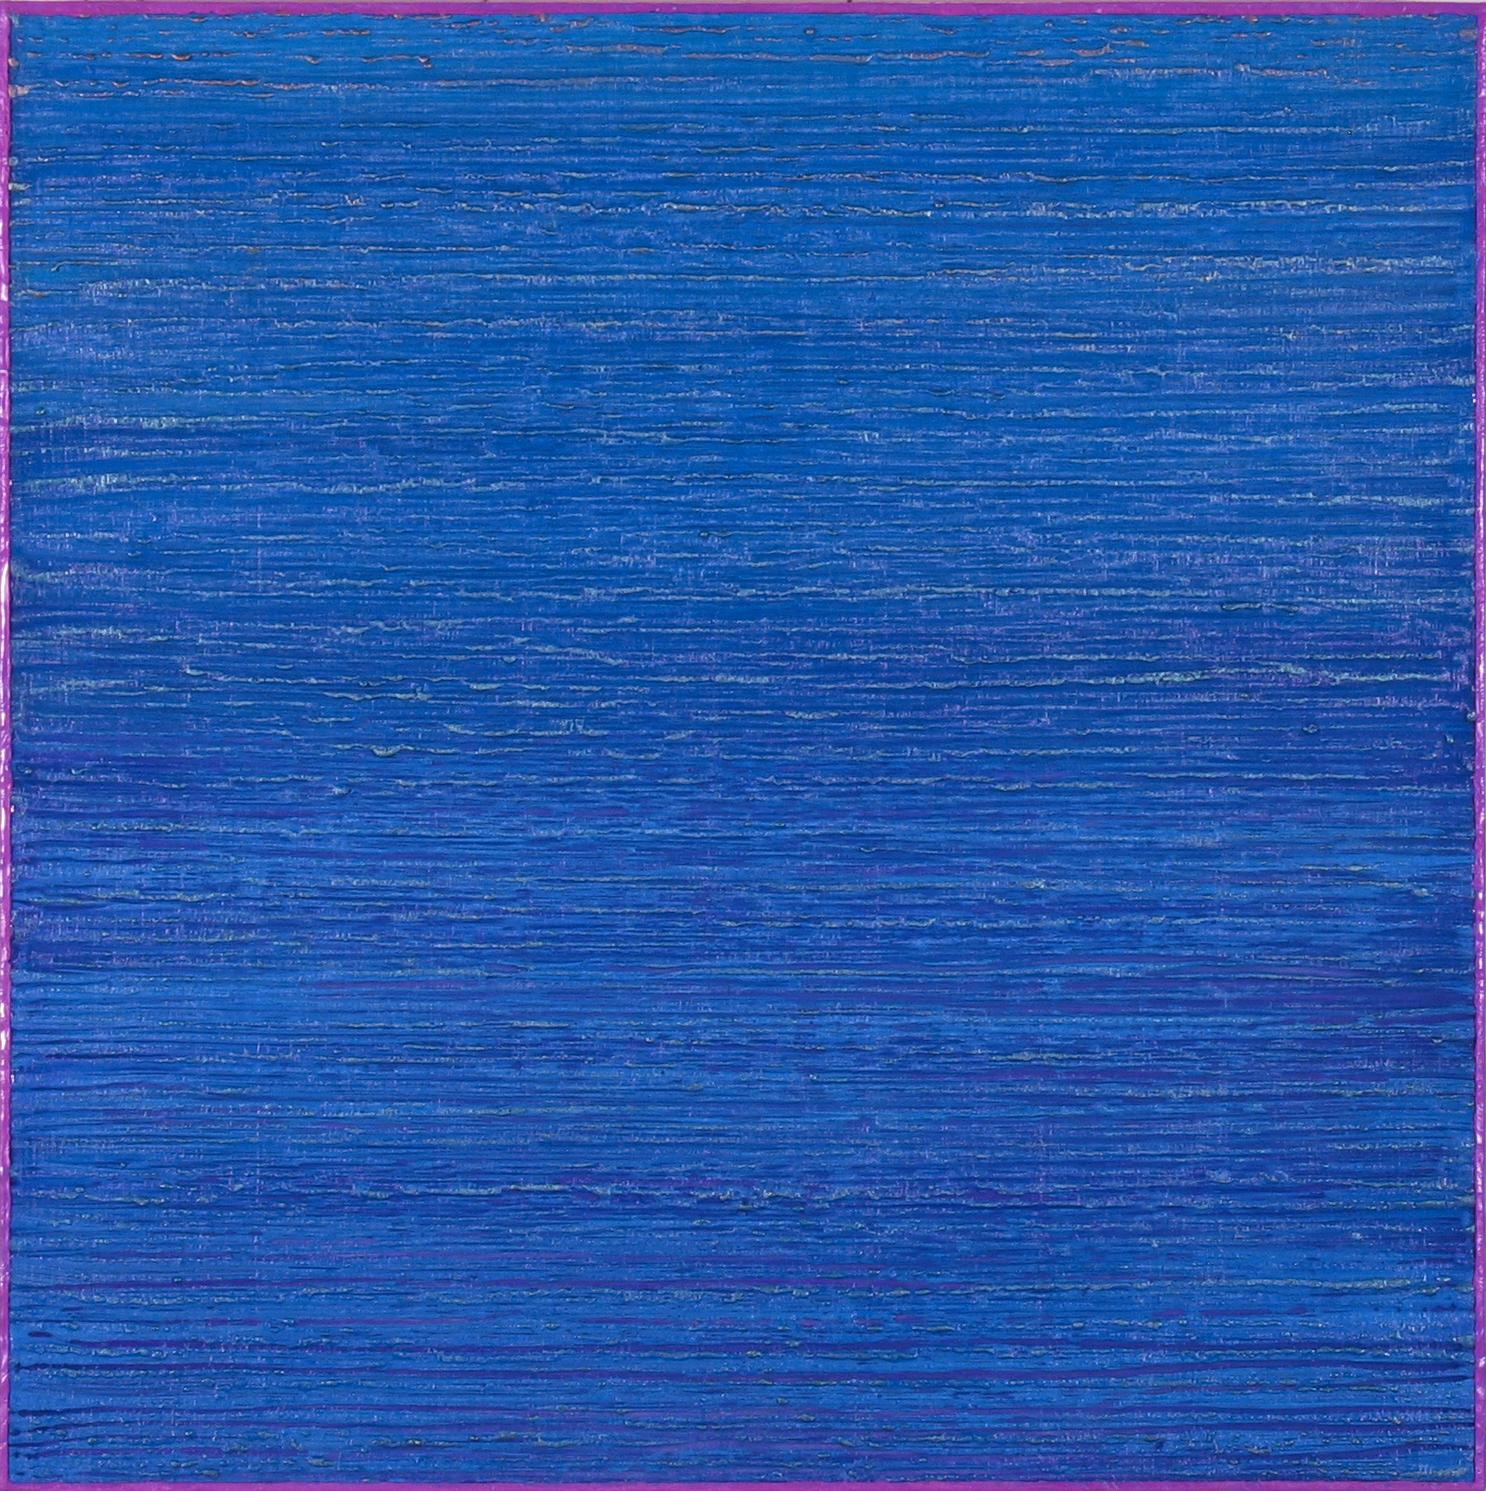 A deep, bright cobalt blue encaustic (pigmented beeswax) painting with light purple and vibrant teal accents on birch panel. Signed, dated and titled on verso.

Joanne Mattera’s paintings can be described as lush minimalism, the work is